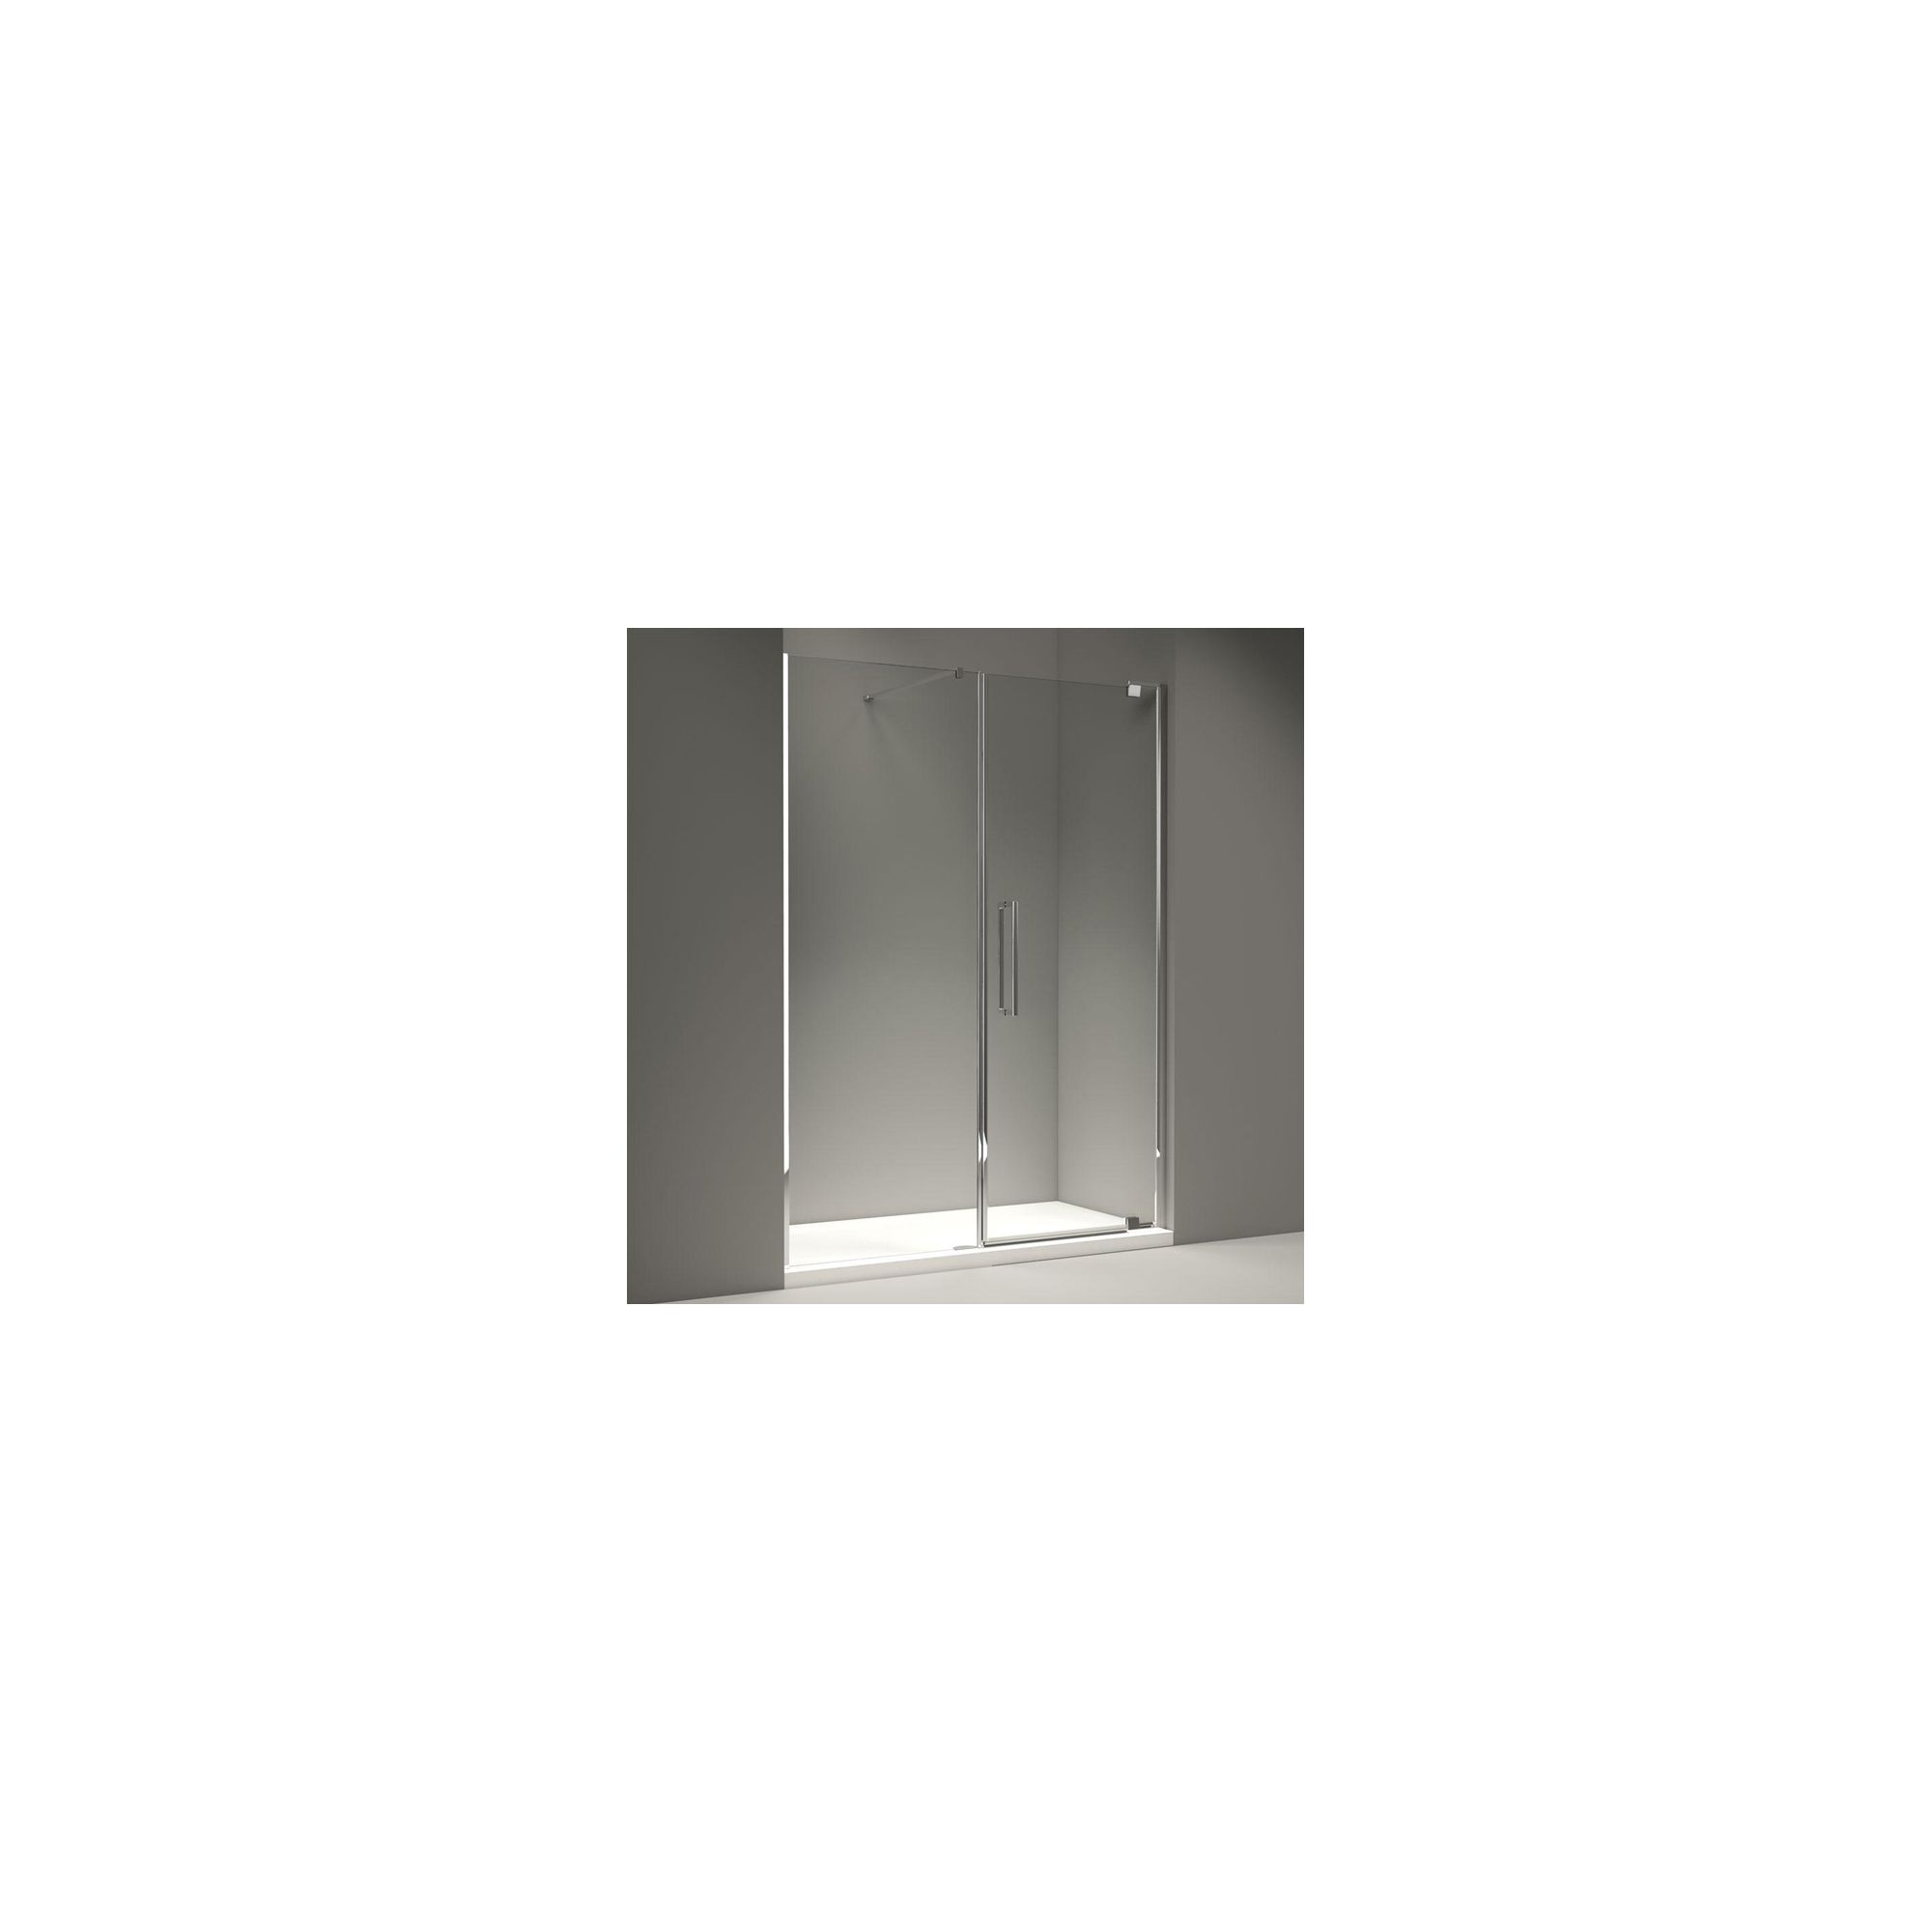 Merlyn Series 10 Inline Pivot Shower Door, 1700mm Wide, 10mm Smoked Glass at Tesco Direct